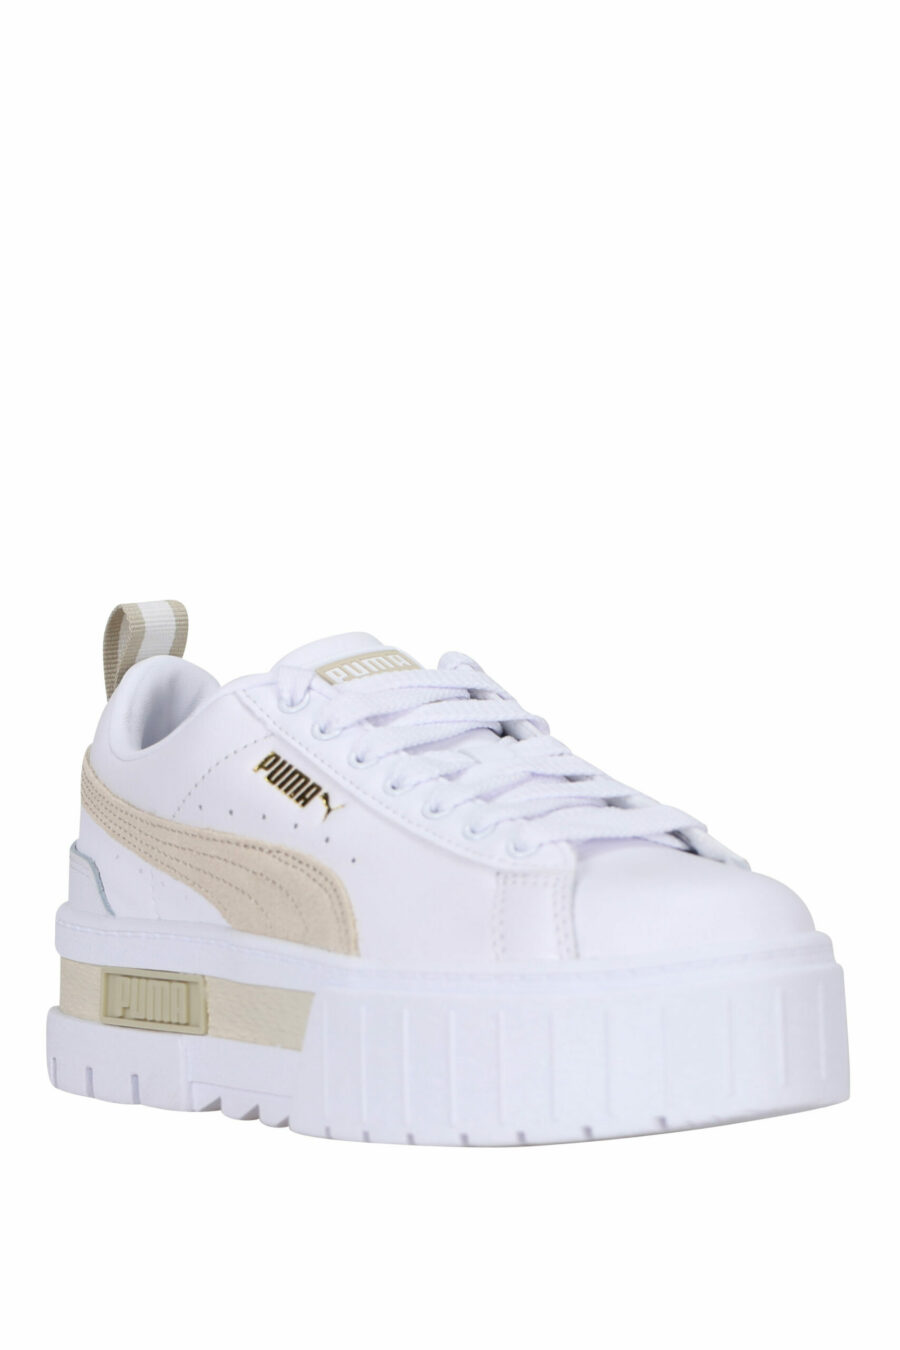 White trainers "mayze" with gold - 4063699783445 1 scaled